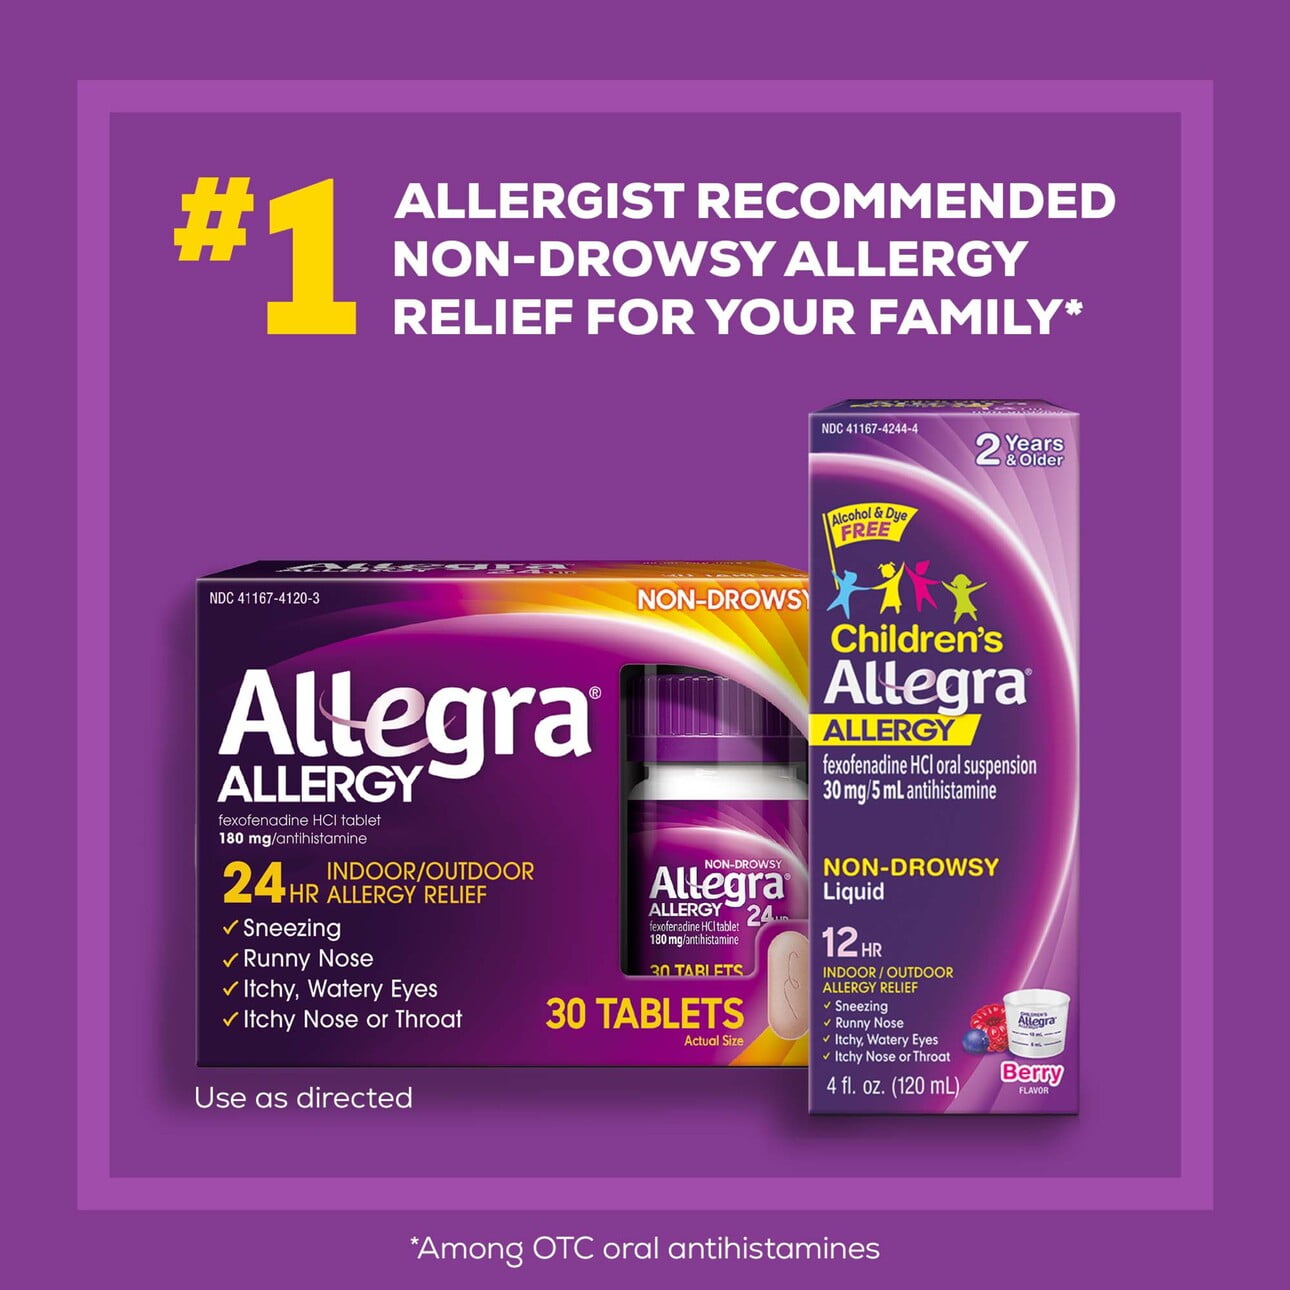 Allegra 24 Hour Non-Drowsy Antihistamine Medicine Tablets for Adult Allergy Relief, Fexofenadine, 180 mg, 30 Pills - image 4 of 7